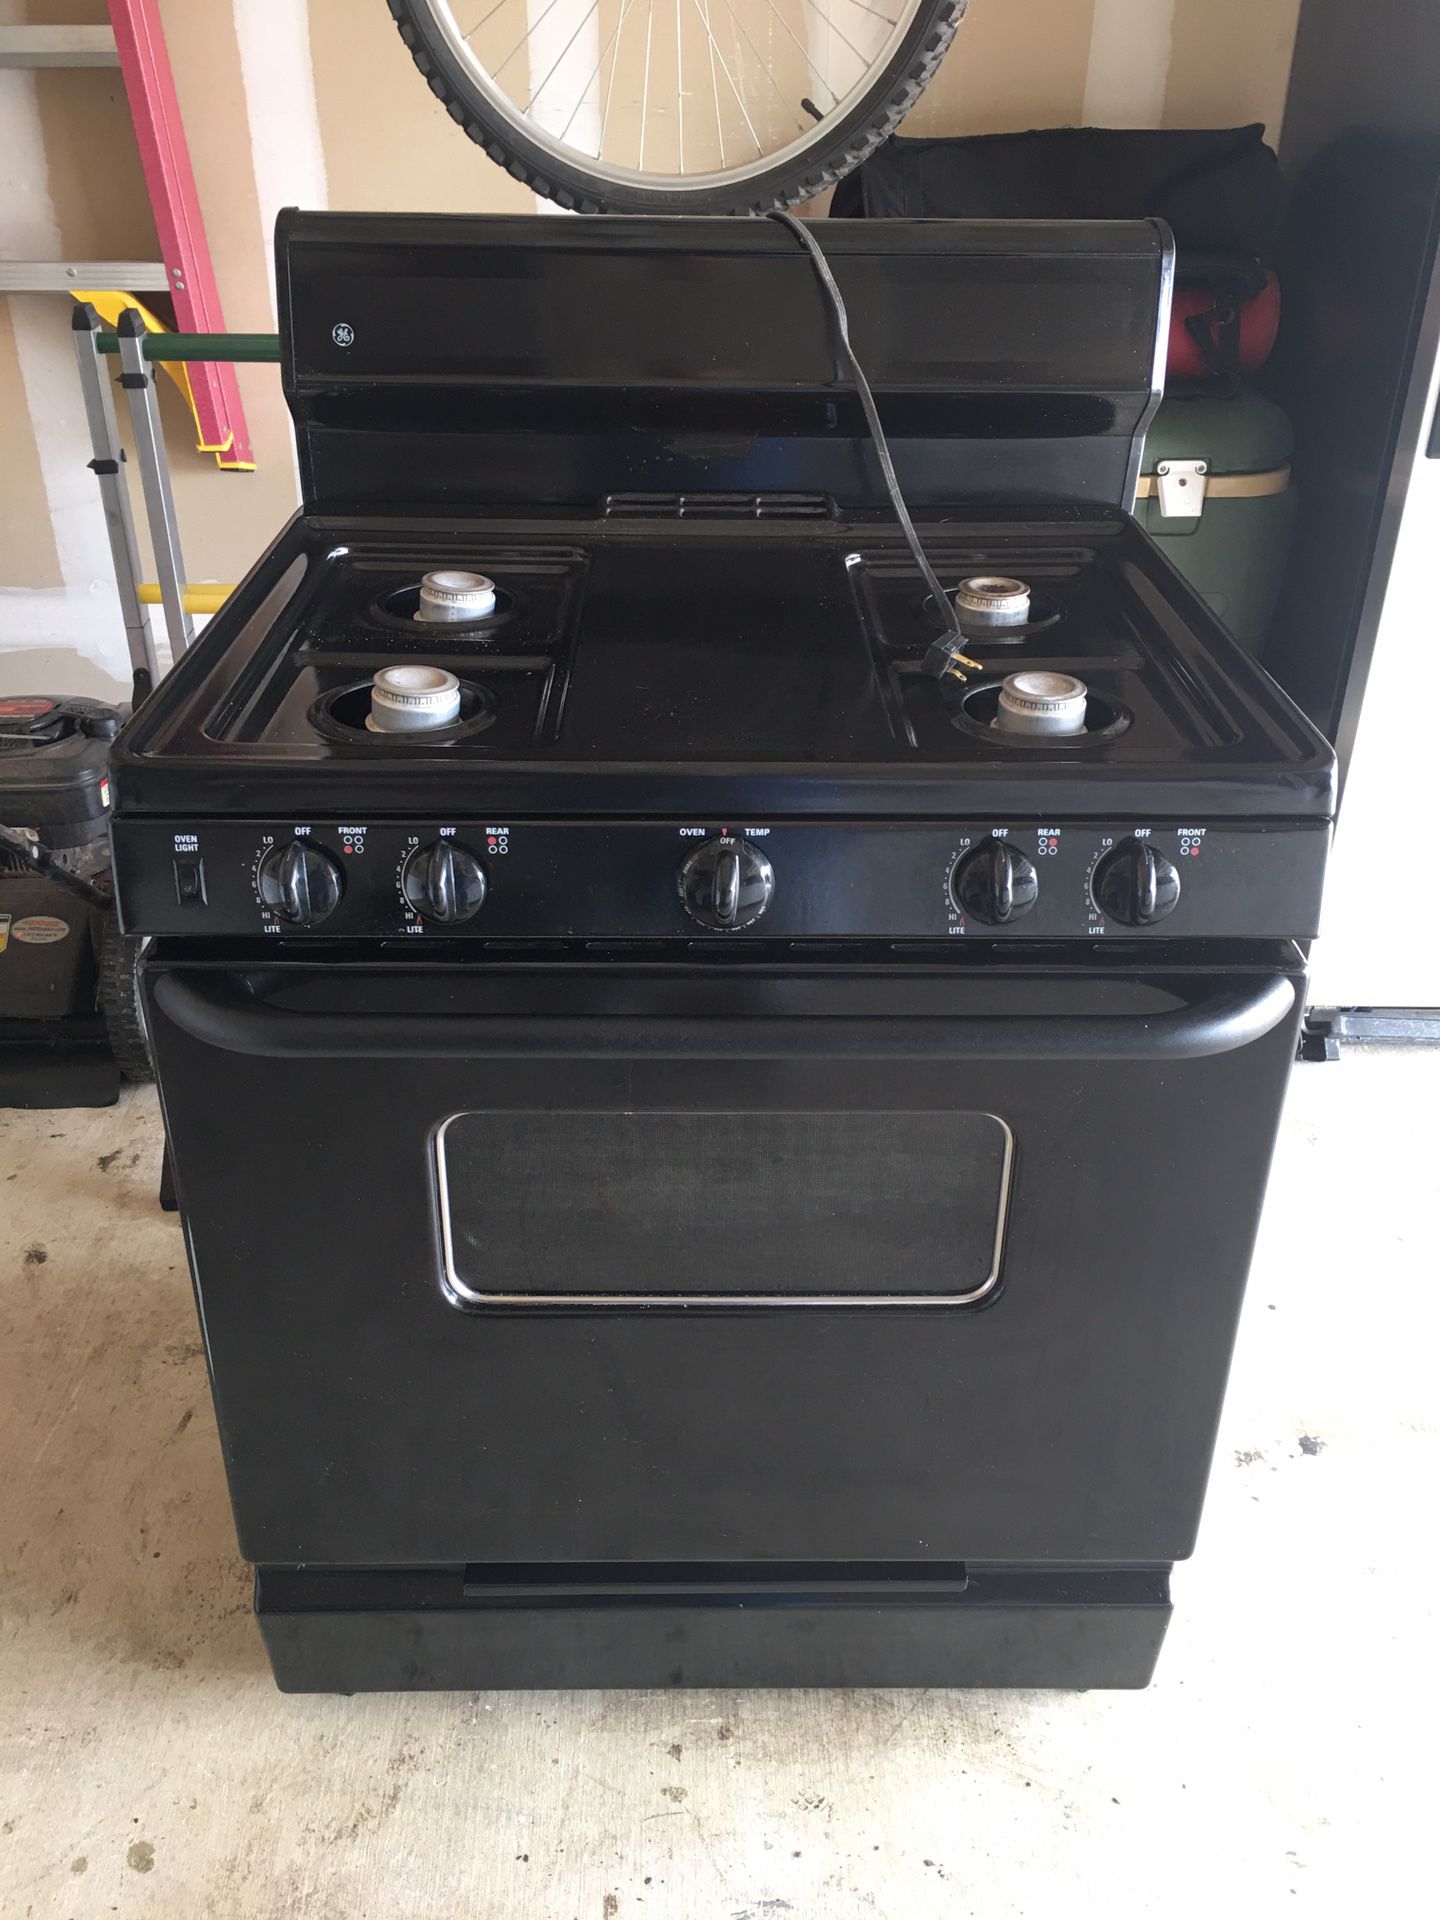 GE gas stove in great working condition